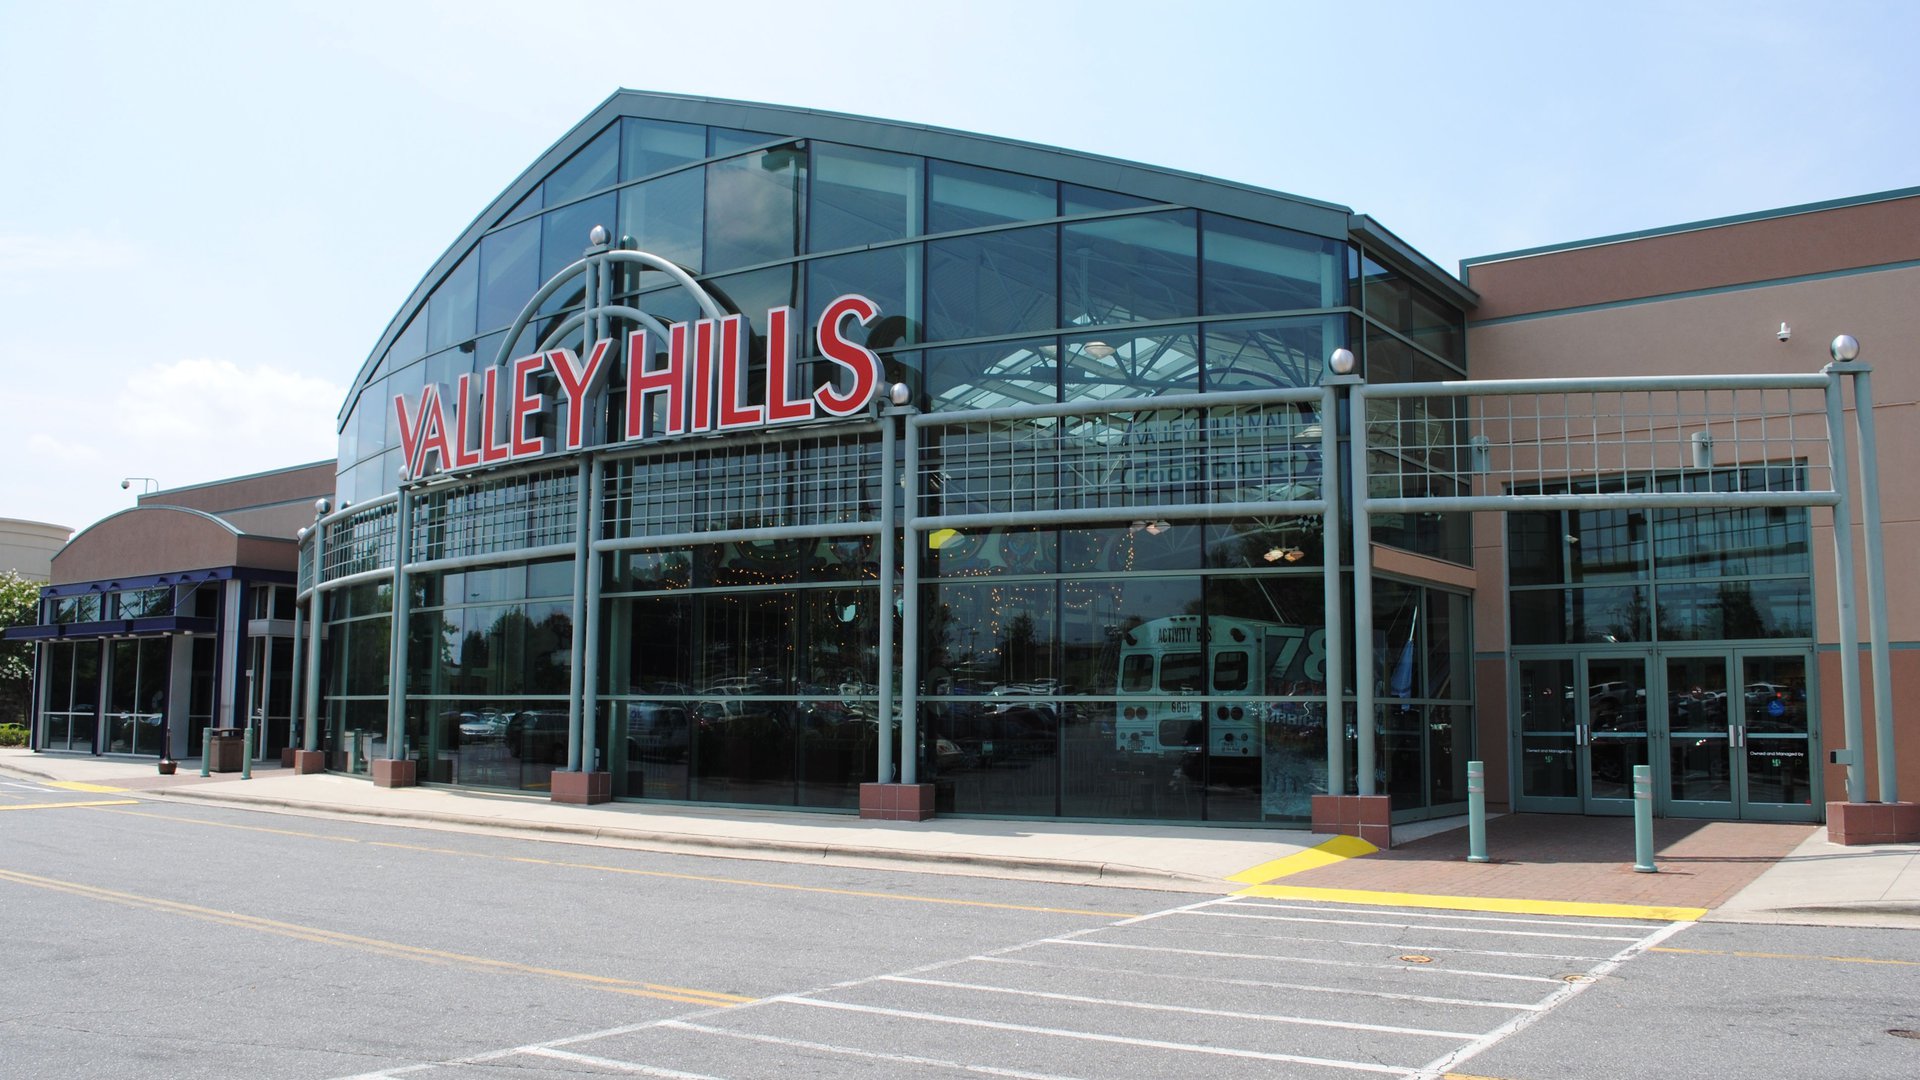 Valley Hills Mall Hickory NC